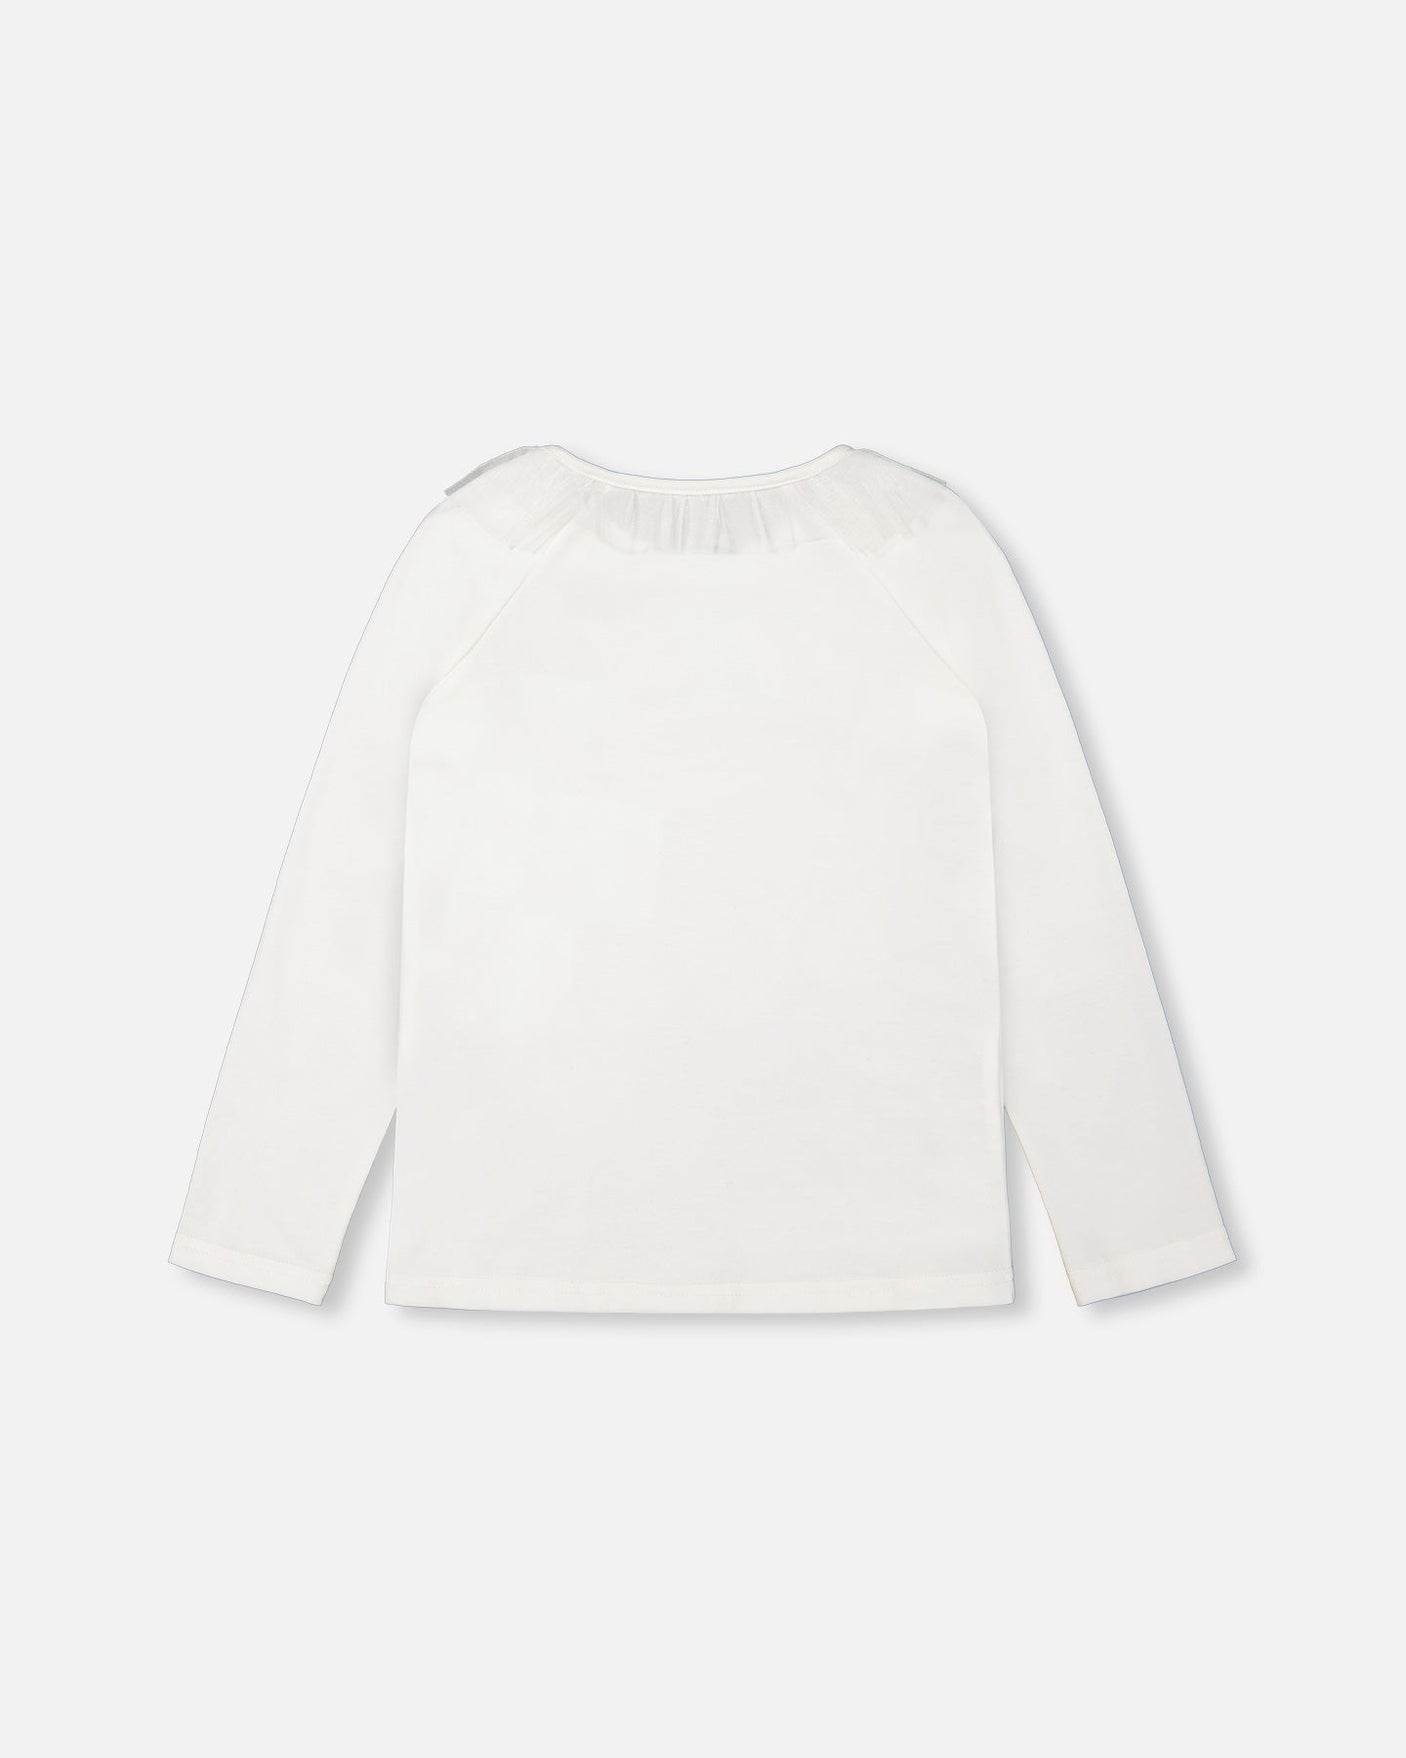 Long Sleeve Top With Frills Off White-1